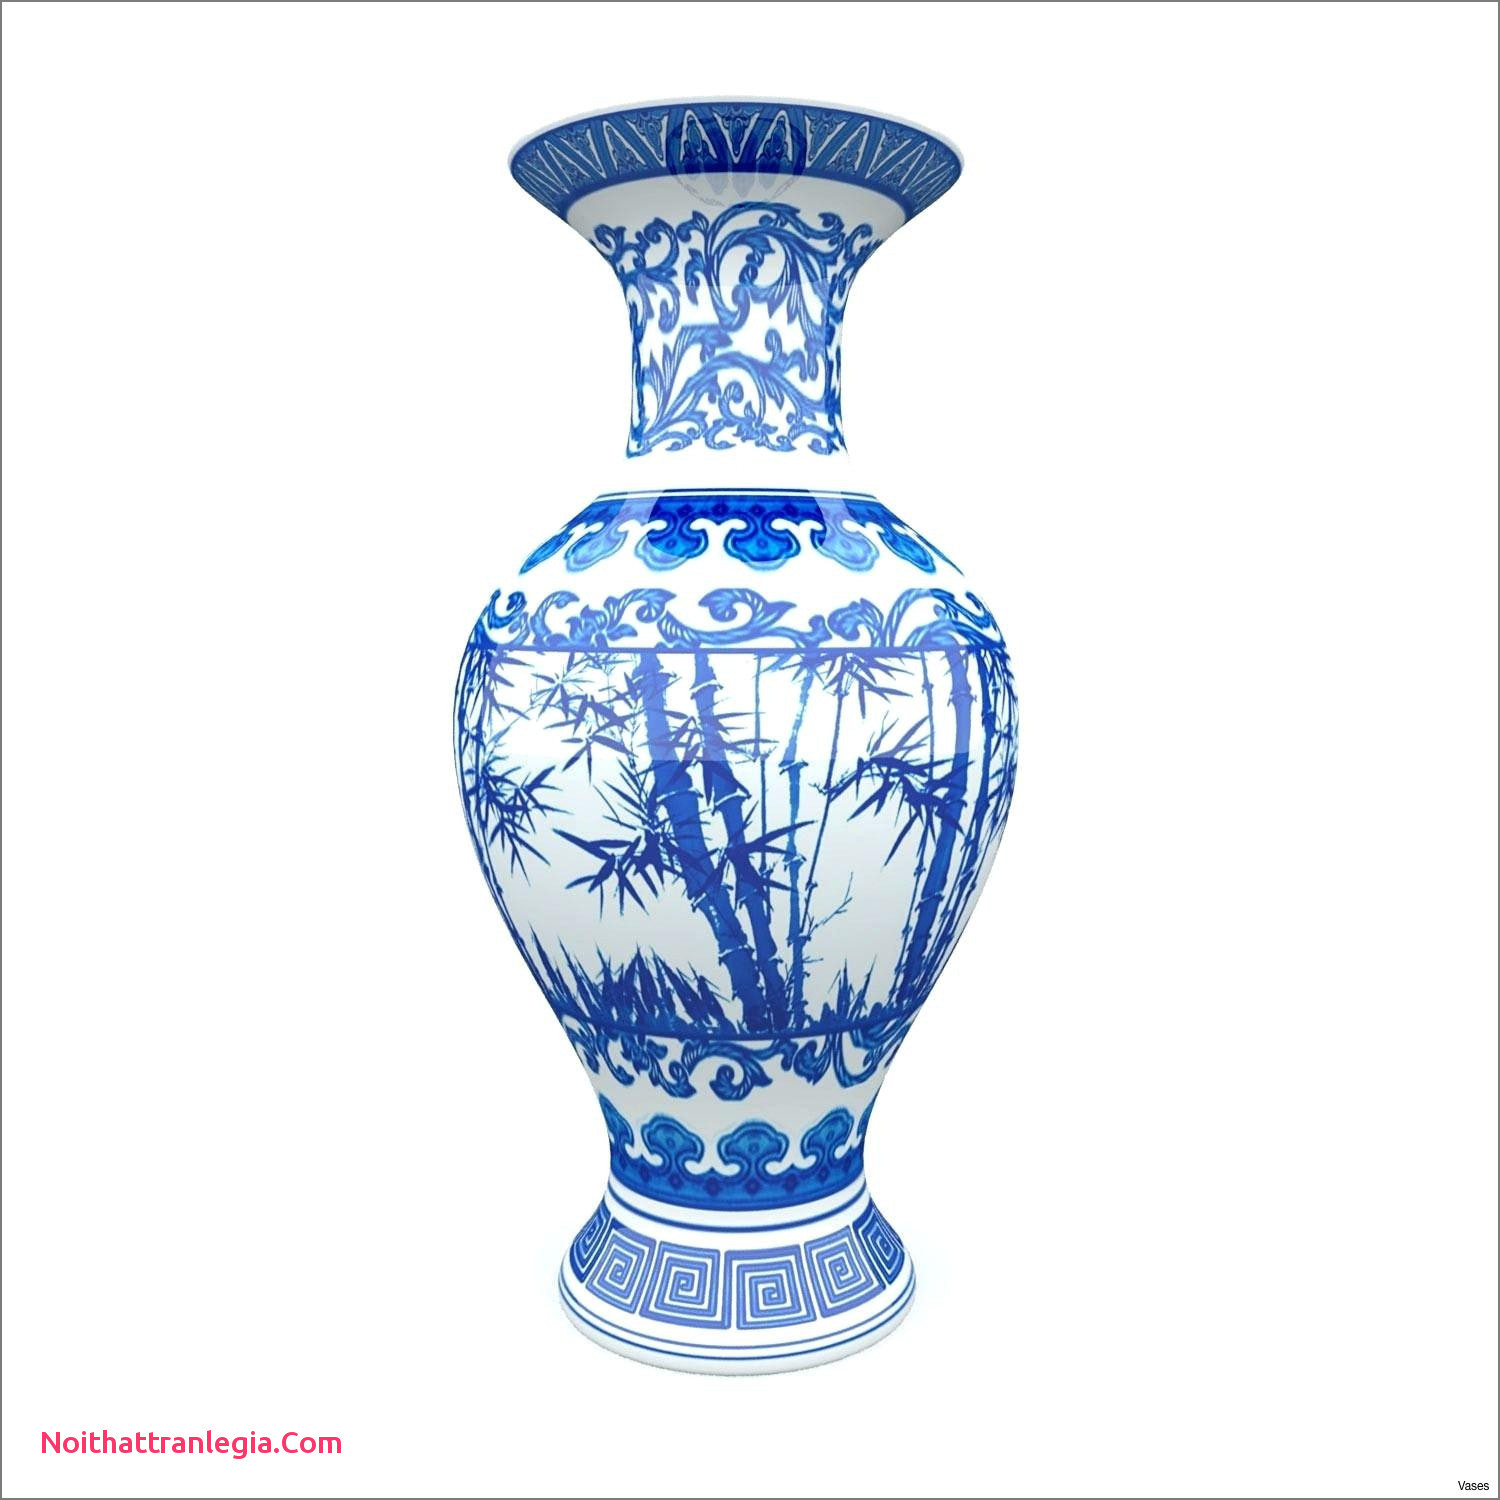 26 Ideal Chinese Cloisonne Vase 2024 free download chinese cloisonne vase of 20 chinese antique vase noithattranlegia vases design with antique table lamp markings new chinese dynasty vase markings lamp base ceramic art historyh vases